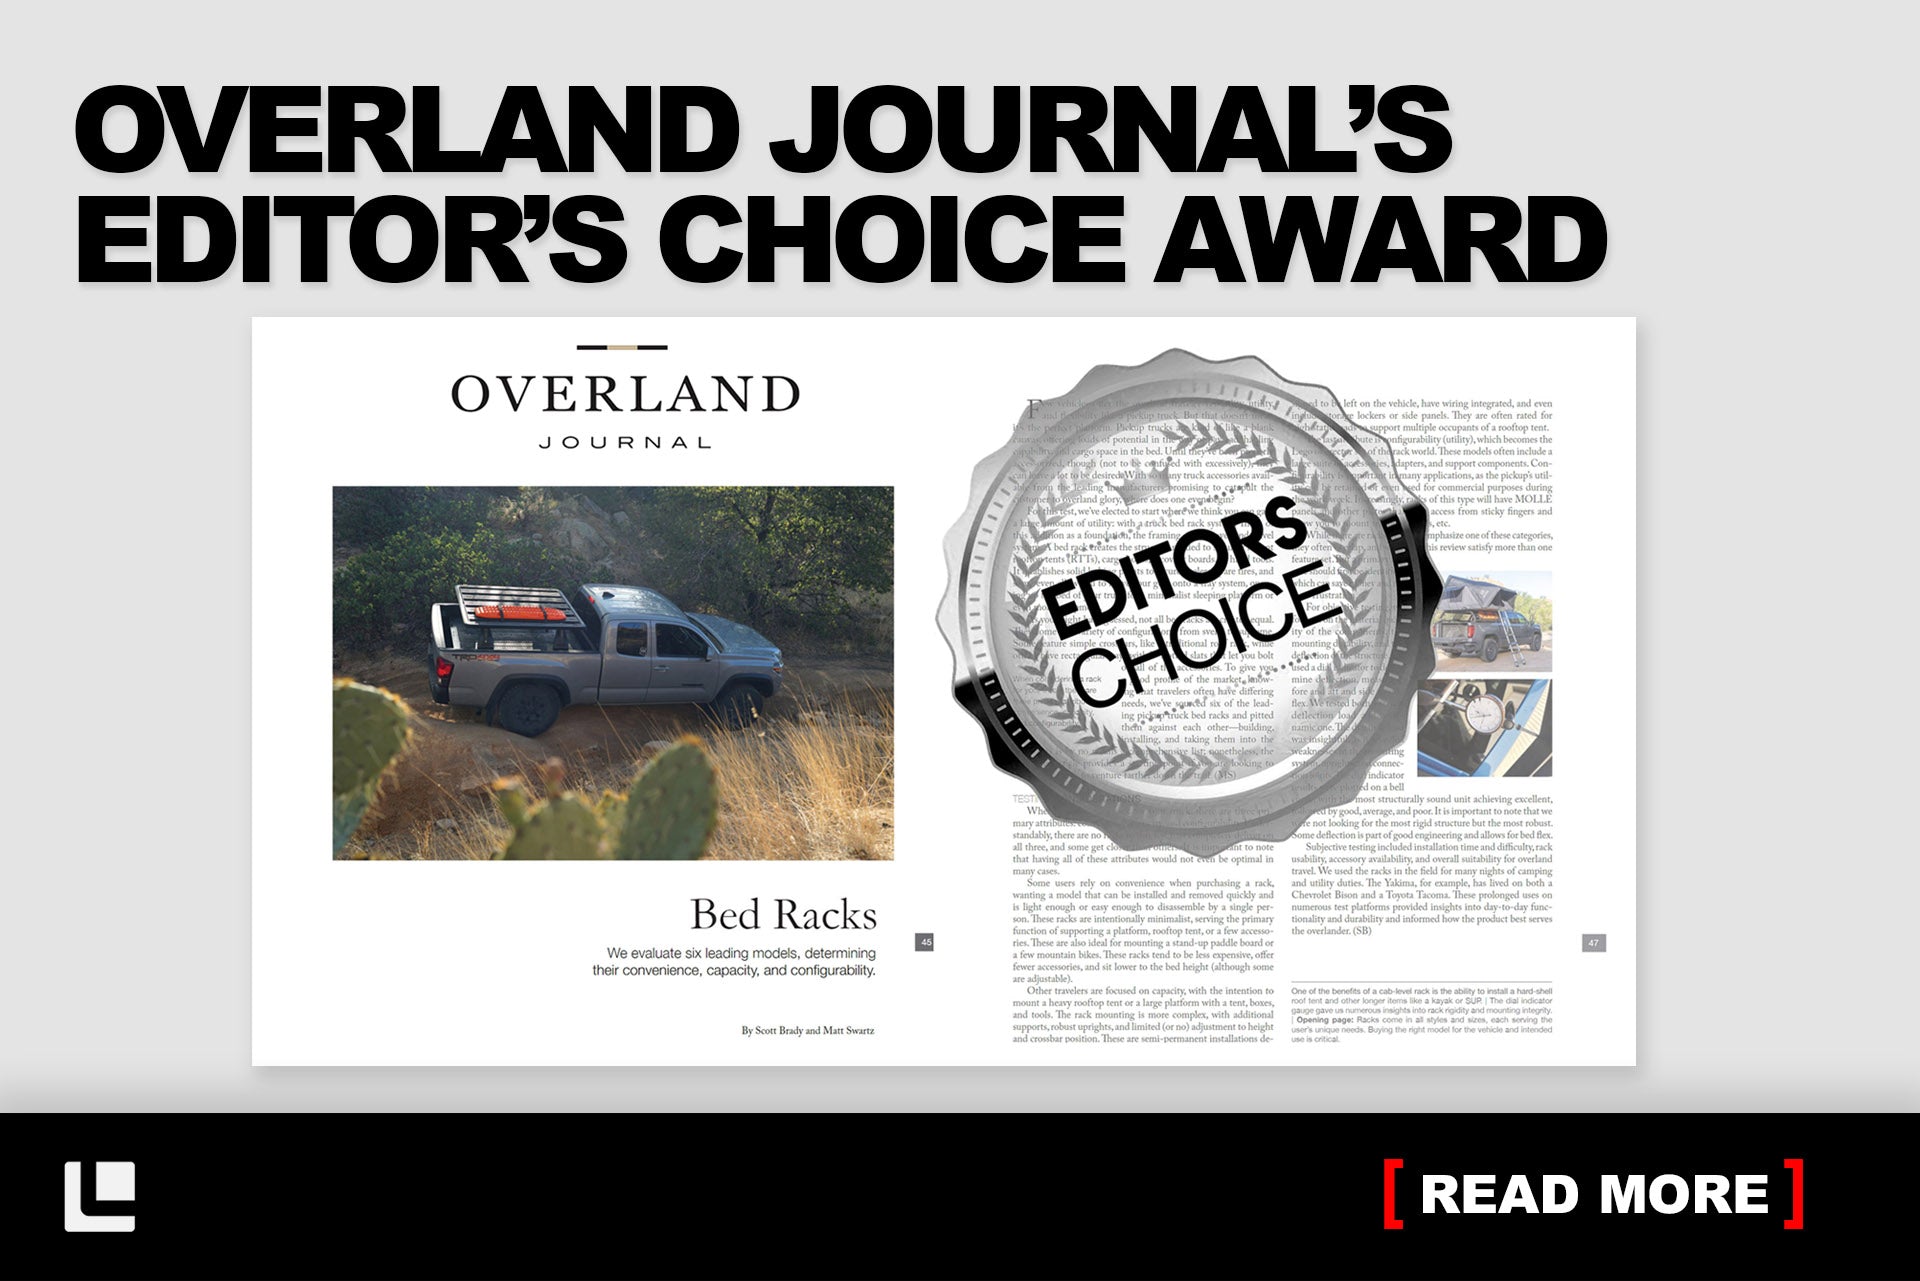 Leitner Designs’ ACS Receives ‘Editor’s Choice’ Award from Overland Journal